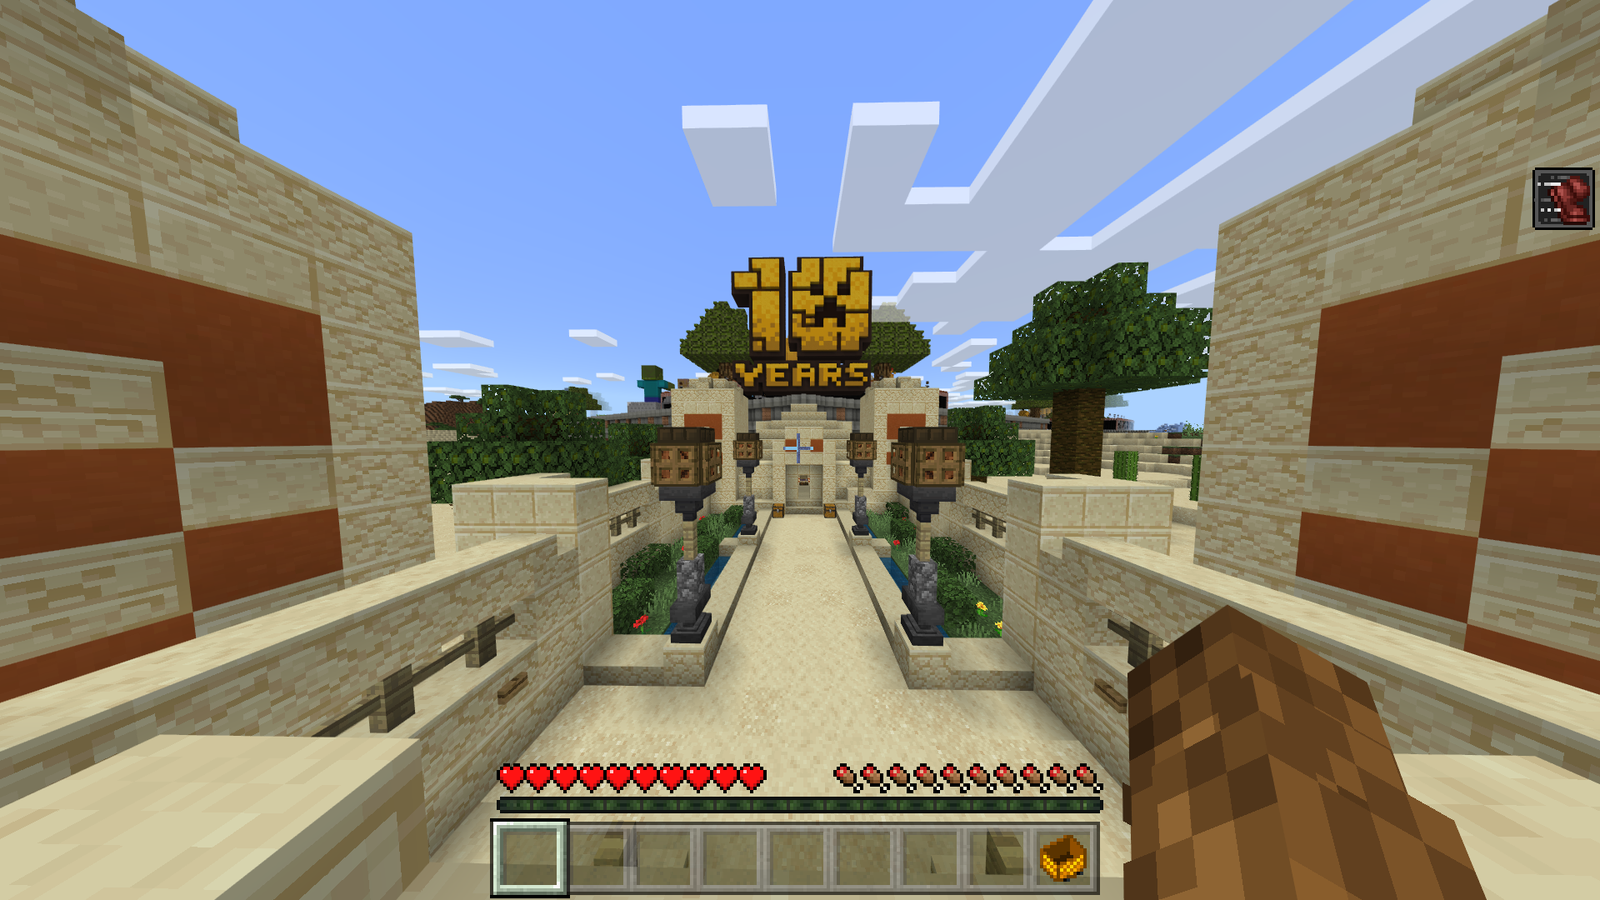 minecraft-s-new-10th-anniversary-map-is-awesome-and-hides-a-few-secrets